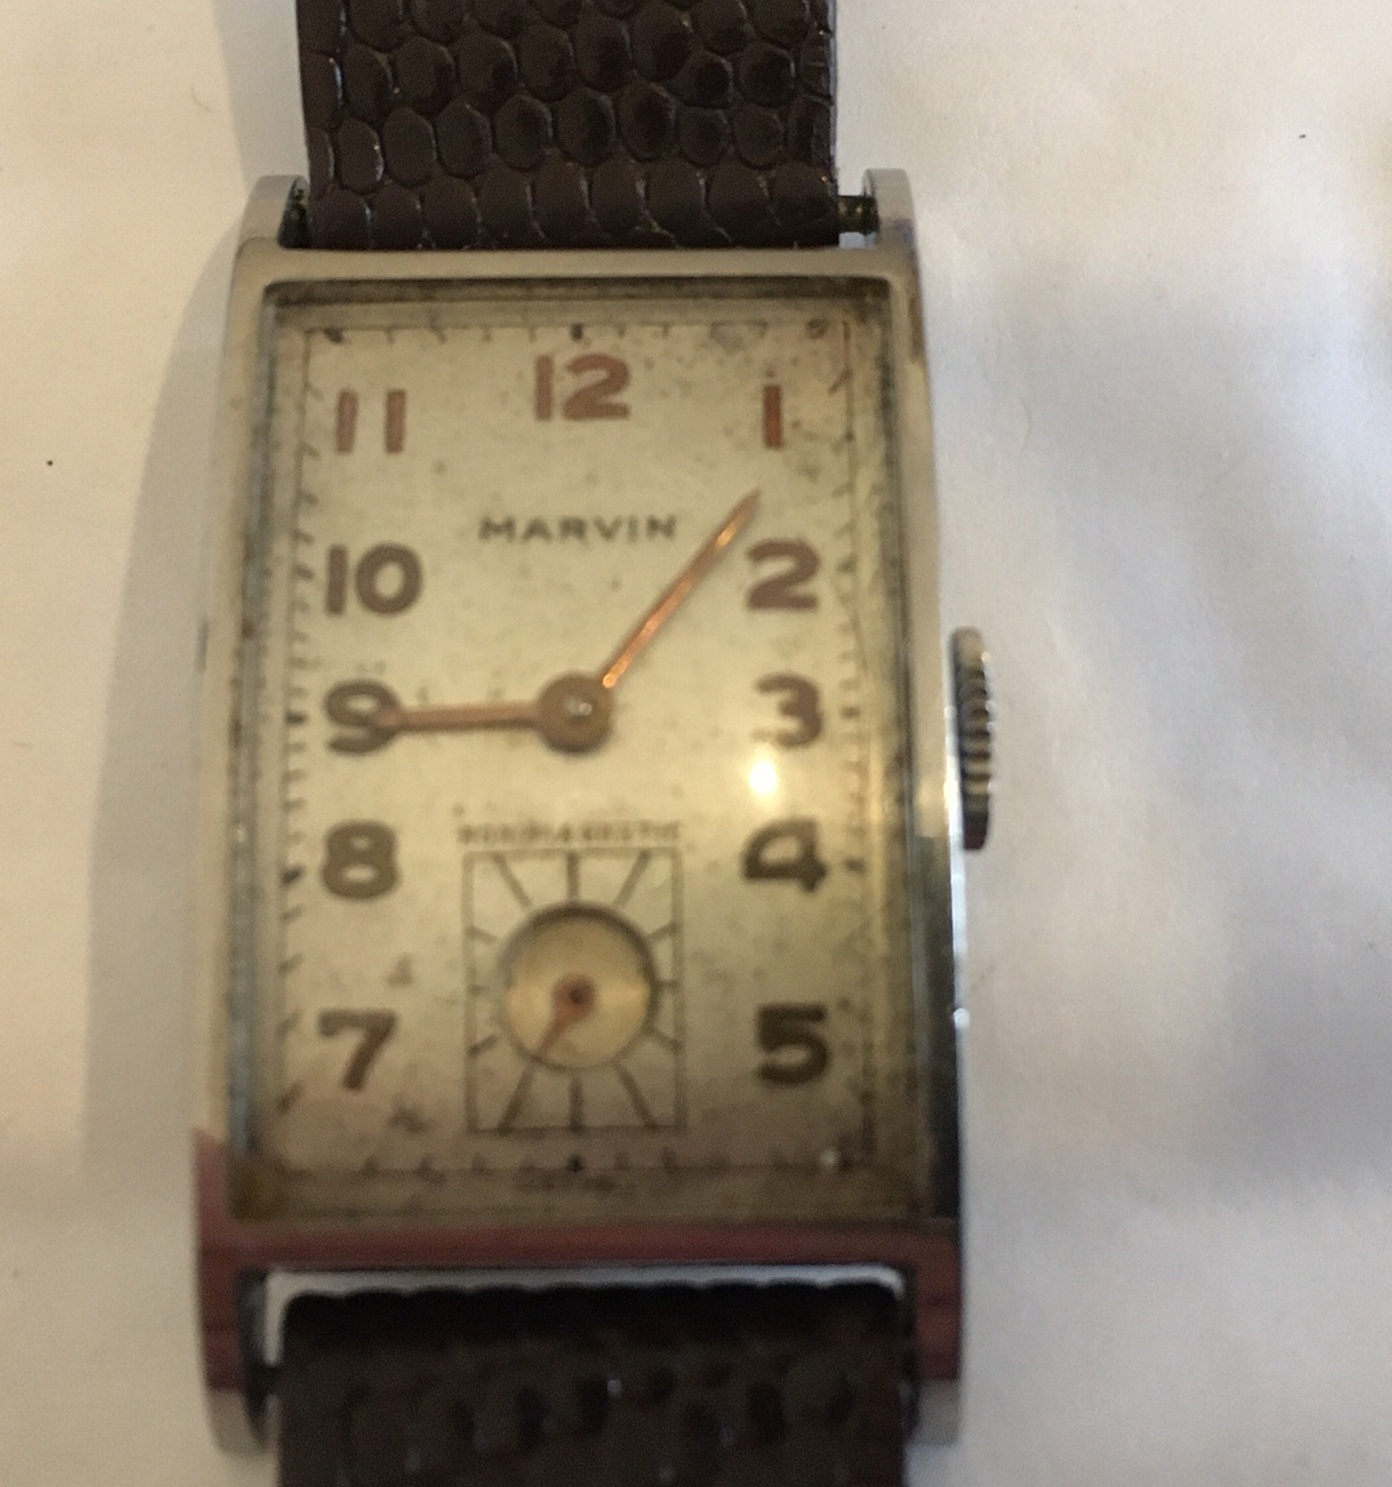 Boxed Art Deco Watch(Marvin) working order.